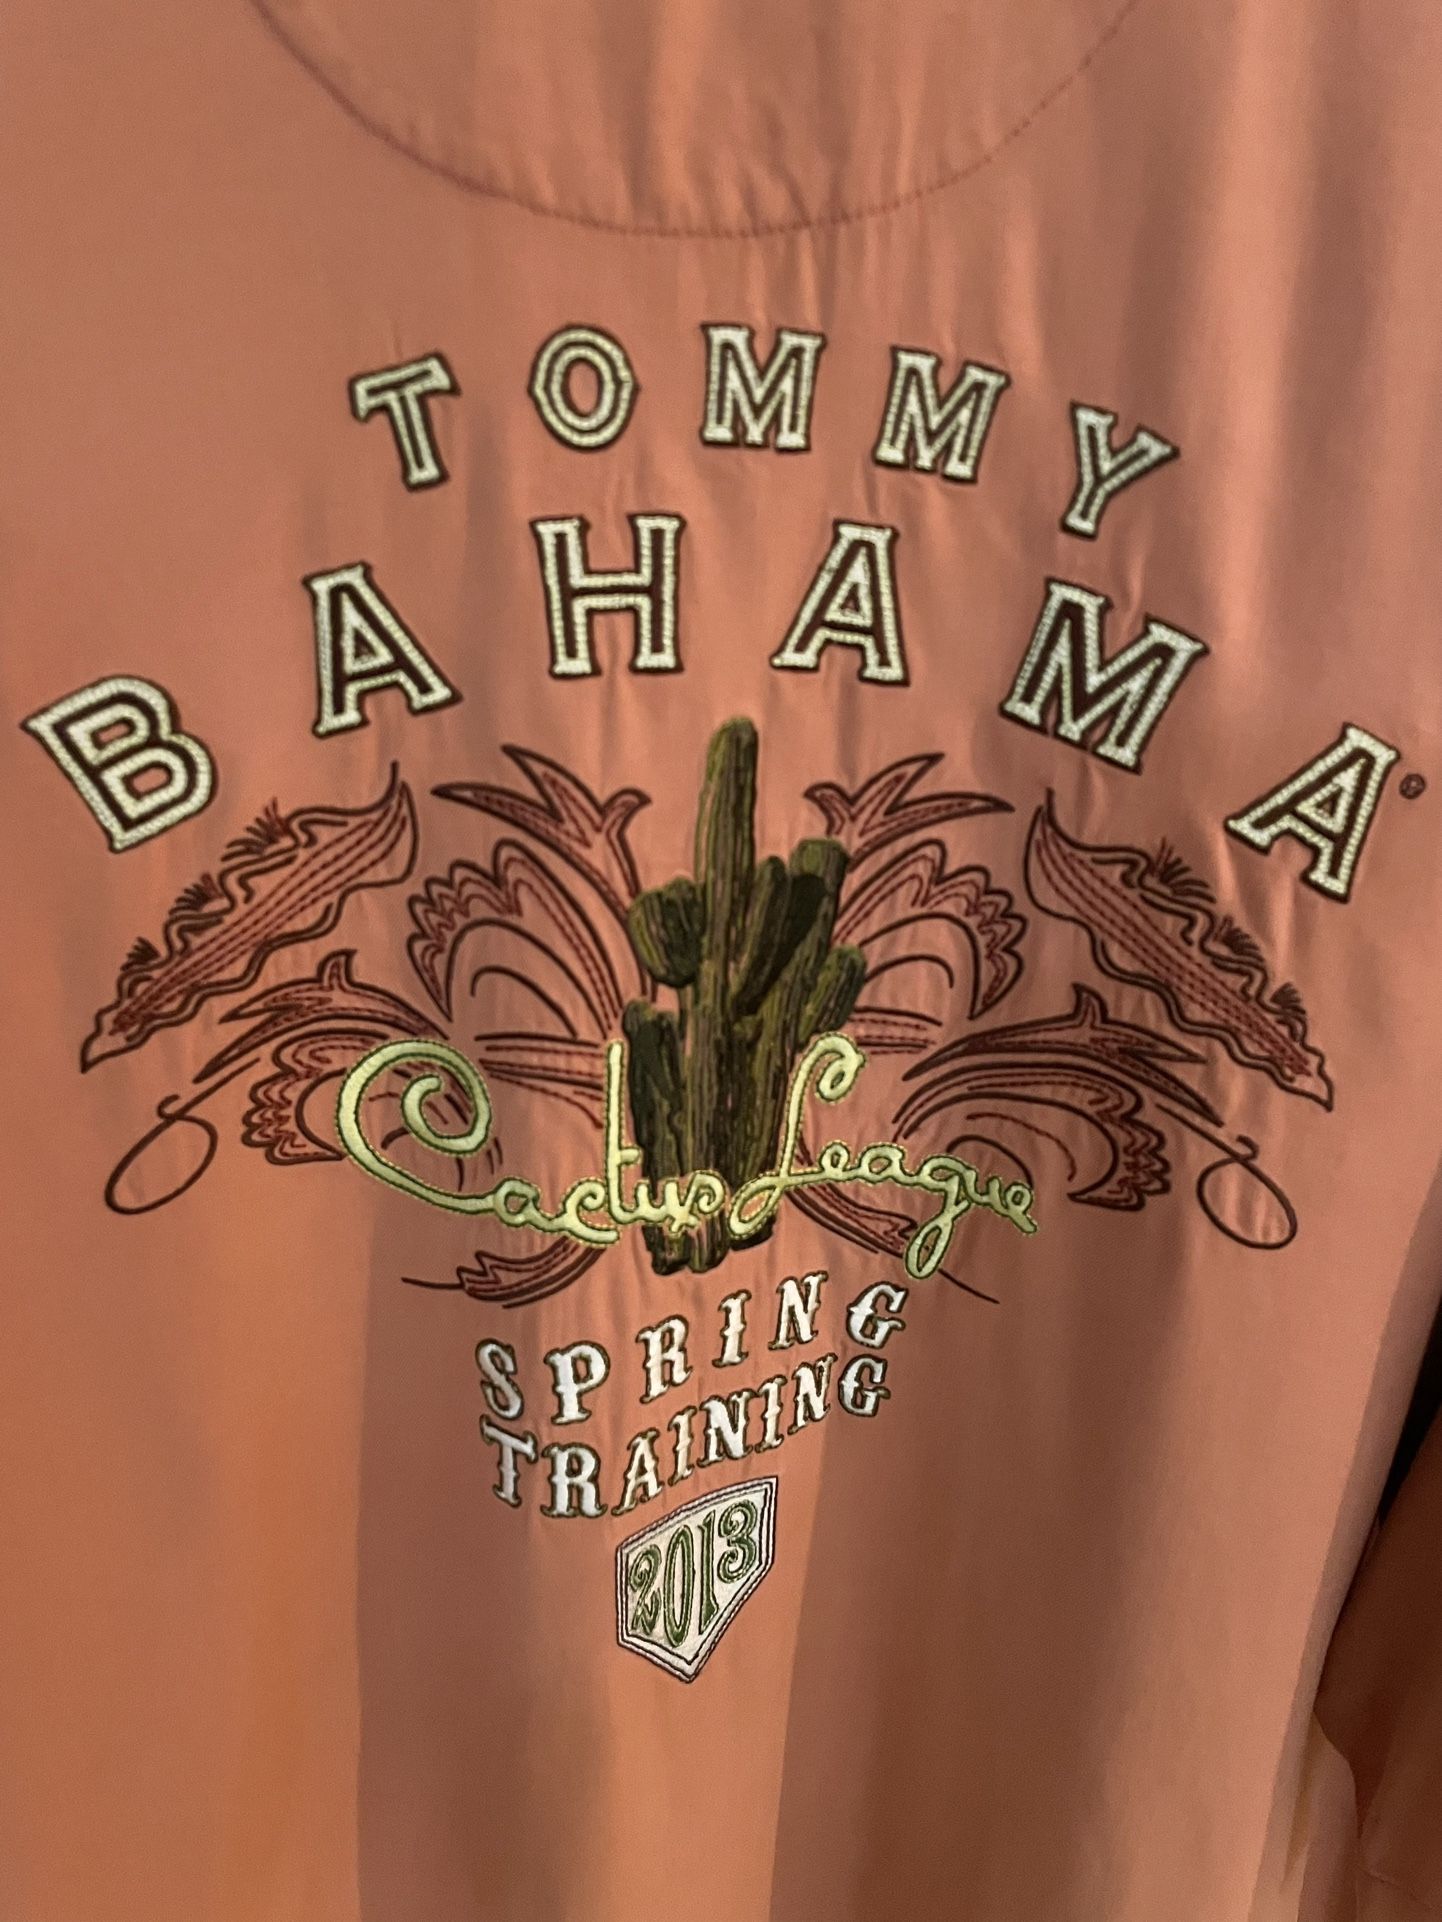 Tommy Bahama Shirt Mens 2XL Cactus League Spring Training 2013 Embroidered Silk